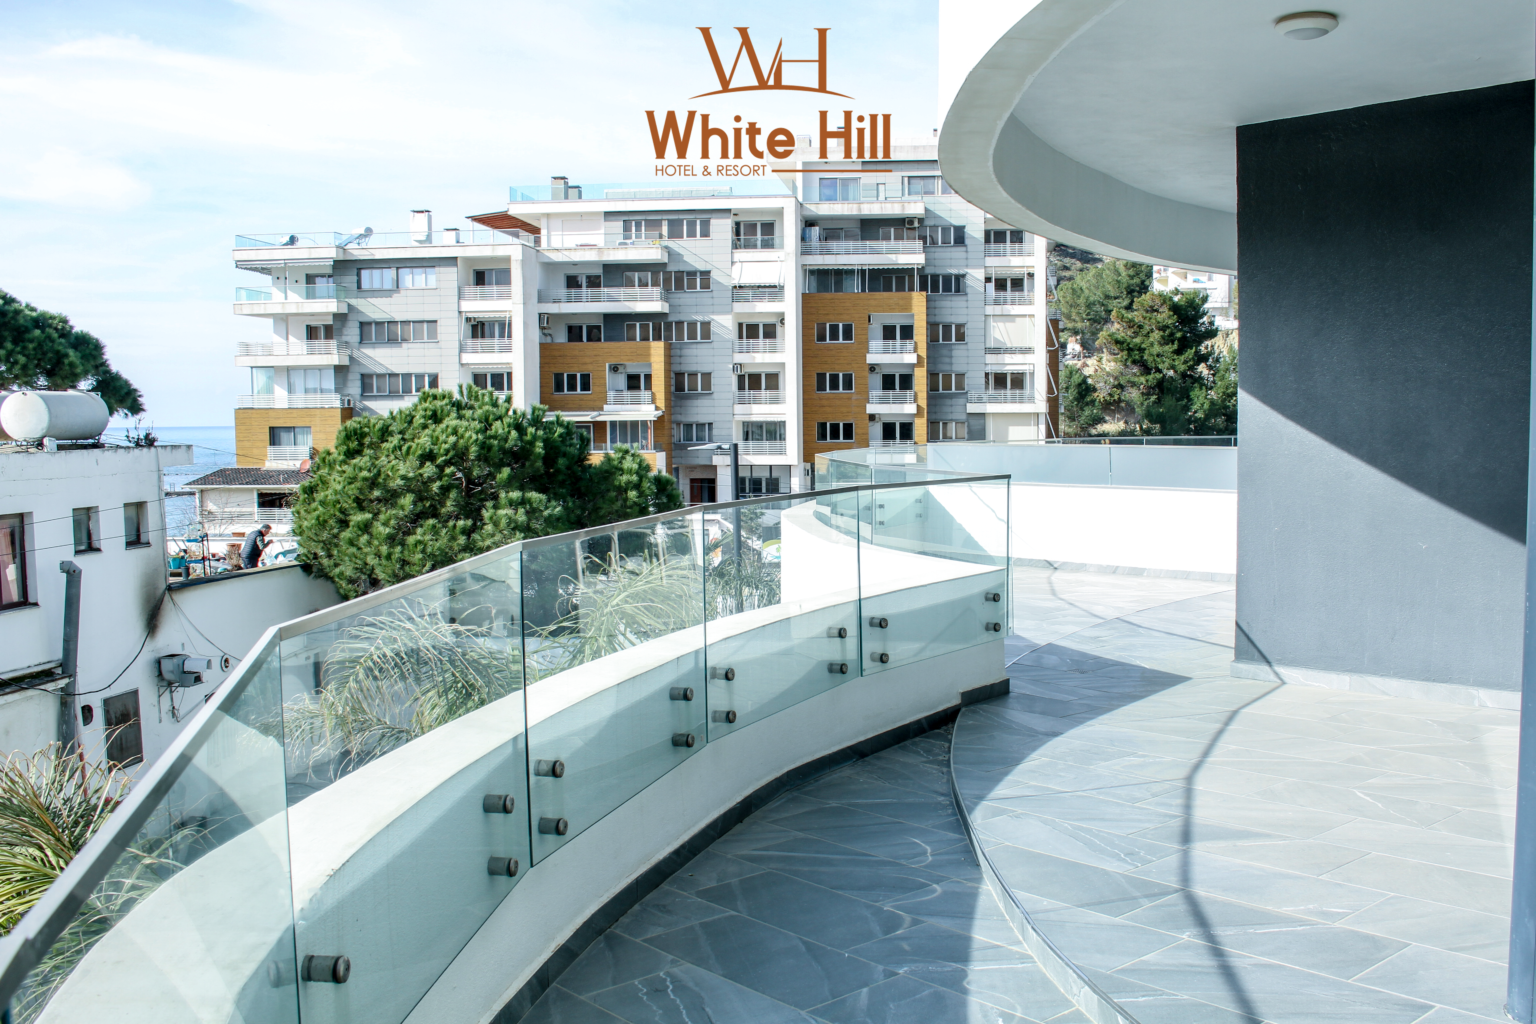 White Hill Resort is one of the most luxurious and amazing hotels on the coast of Durrës. This resort is located in a lively environment, where the beauty of nature and comfort meet in harmony for all visitors. The hotel rooms at White Hill Resort are designed to cater to a traveler's needs. Each room is fitted with modern elements, natural lighting and beautiful views of the sea or the wonderful greenery of nature. The hotel rooms are very spacious, including comfortable beds, large private bathrooms, air conditioning, mini-bar, excellent TV and unlimited Internet access. In addition, visitors can choose between rooms with sea views or those with beautiful views of the surrounding forests and gardens. In the restaurant house, which are scattered several restaurants, from those with a beautiful view of the sea to those specializing in local cuisine, and visitors can enjoy excellent cuisine and excellent service. In addition, White Hill Resort also offers additional services such as outdoor swimming pool, fitness center, beach sports, as well as spa and relaxation center for all their stress and relaxation activities. With a wonderful ambience, top services and amazing views, White Hill Resort in Durrës is a destination that is sure for your trip to the Adriatic coast. Fax: +355 52 504 100 Cell: +355 69 313 66 66 Address: Rruga e Currilove, 2001, Durres, Albania Email: info@whitehillhotel.al Web: www.whitehillhotel.al Instagram: Whitehill.hotel